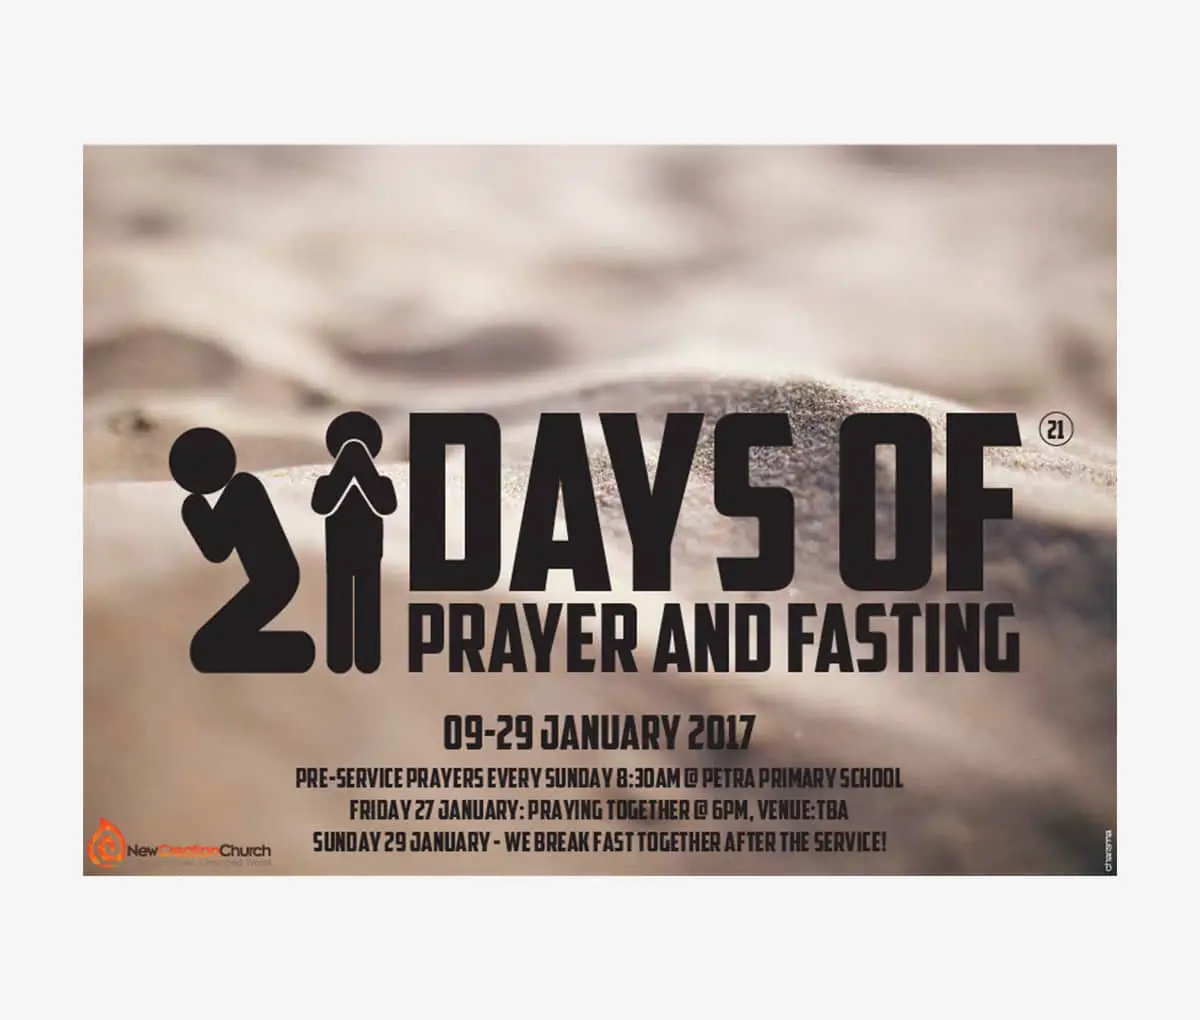 21 Days of Prayer and Fasting Poster